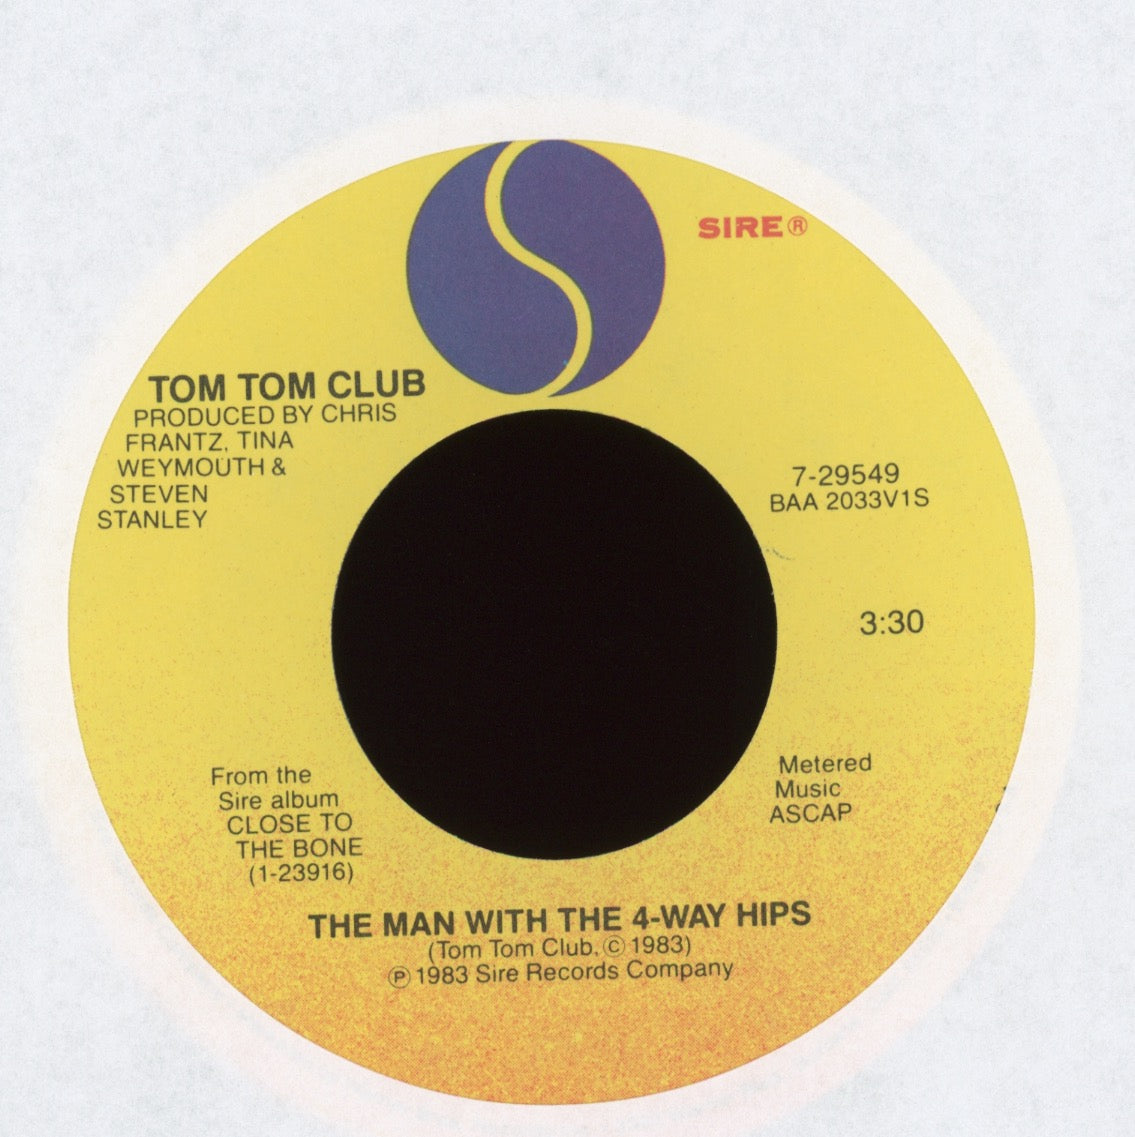 Tom Tom Club - The Man With The 4-Way Hips on Sire With Picture Sleeve